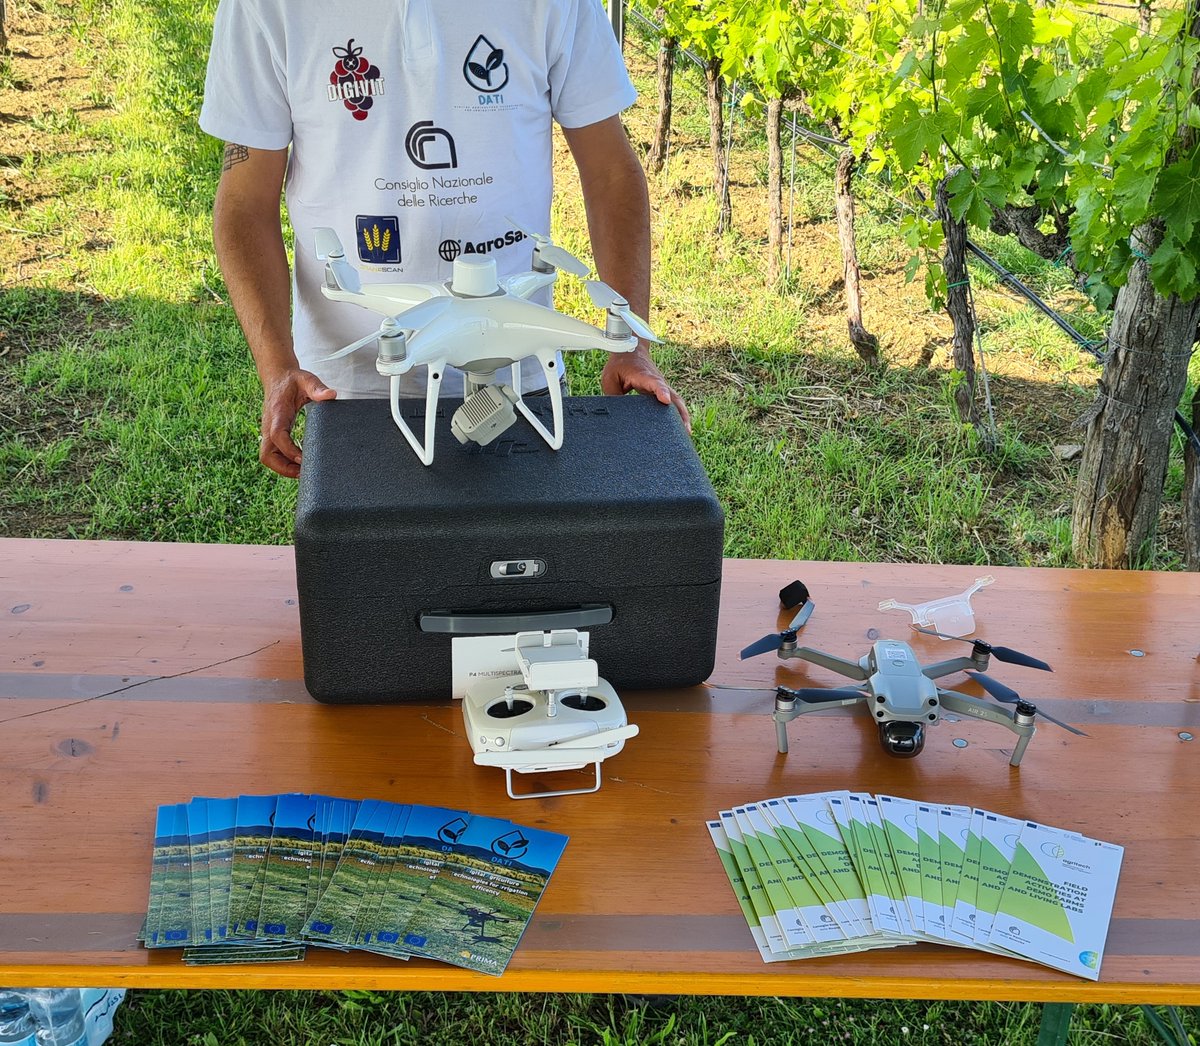 Demonstration day at Living Lab: DATI project meets the students #dissemination #precisionagriculture #FieldDay #agritech #Students #agriculture @Dati2021 @CNRsocial_ @primaitaly @PrimaProgram @terretoscane